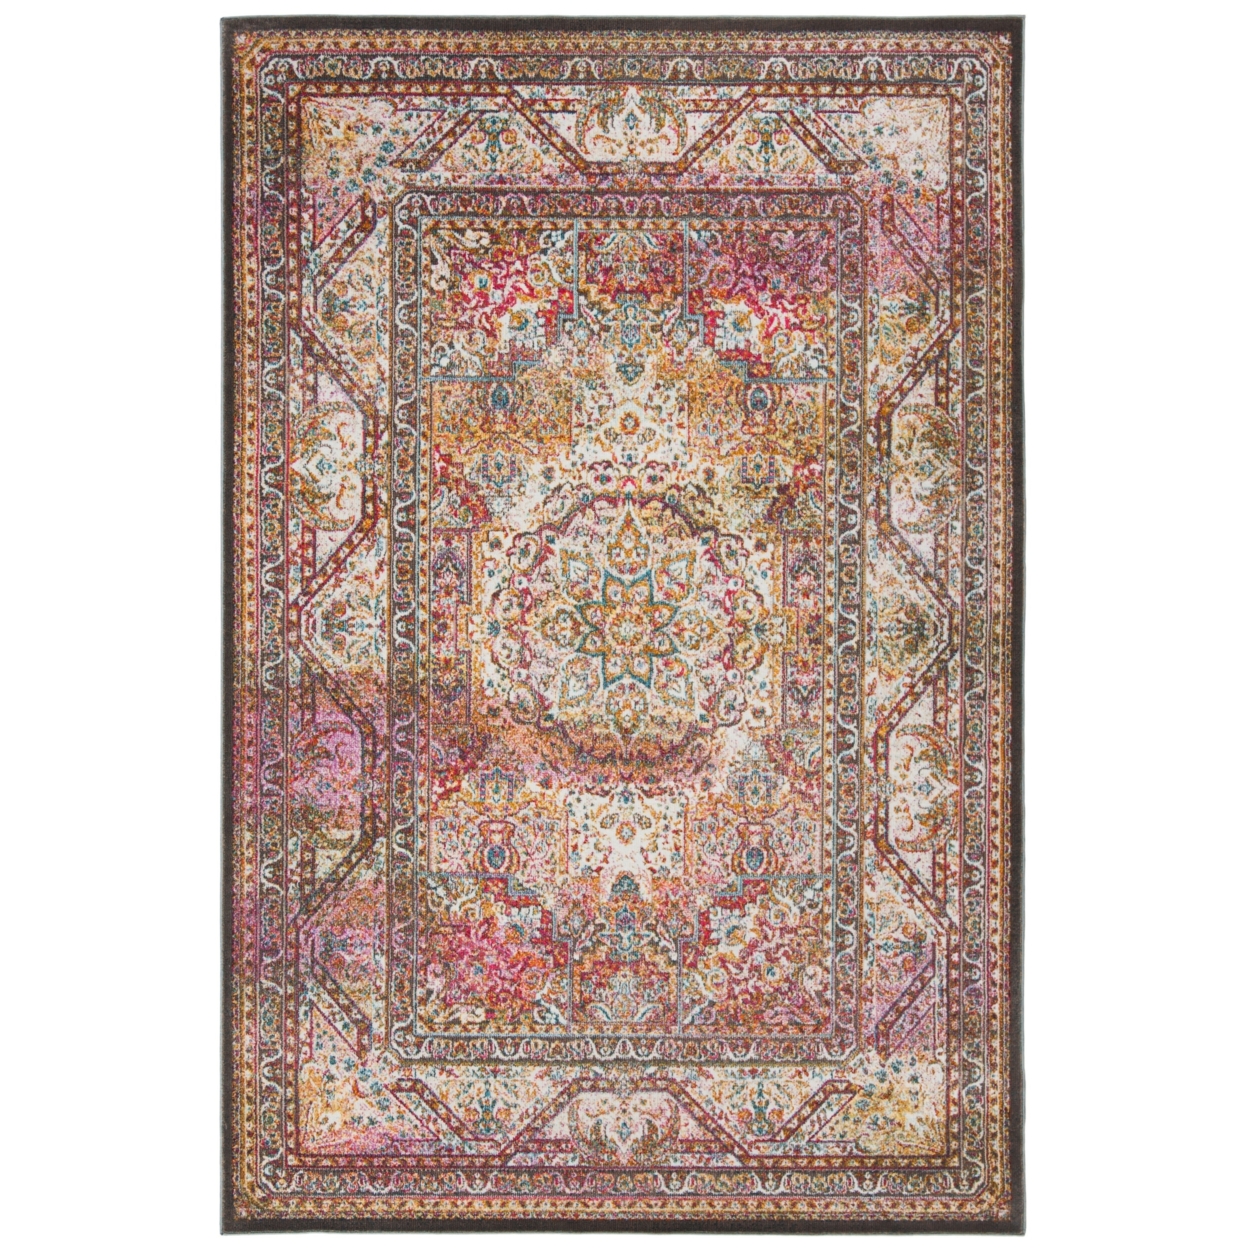 SAFAVIEH Luxor Collection LUX322A Ivory / Fuchsia Rug - 3' X 5'